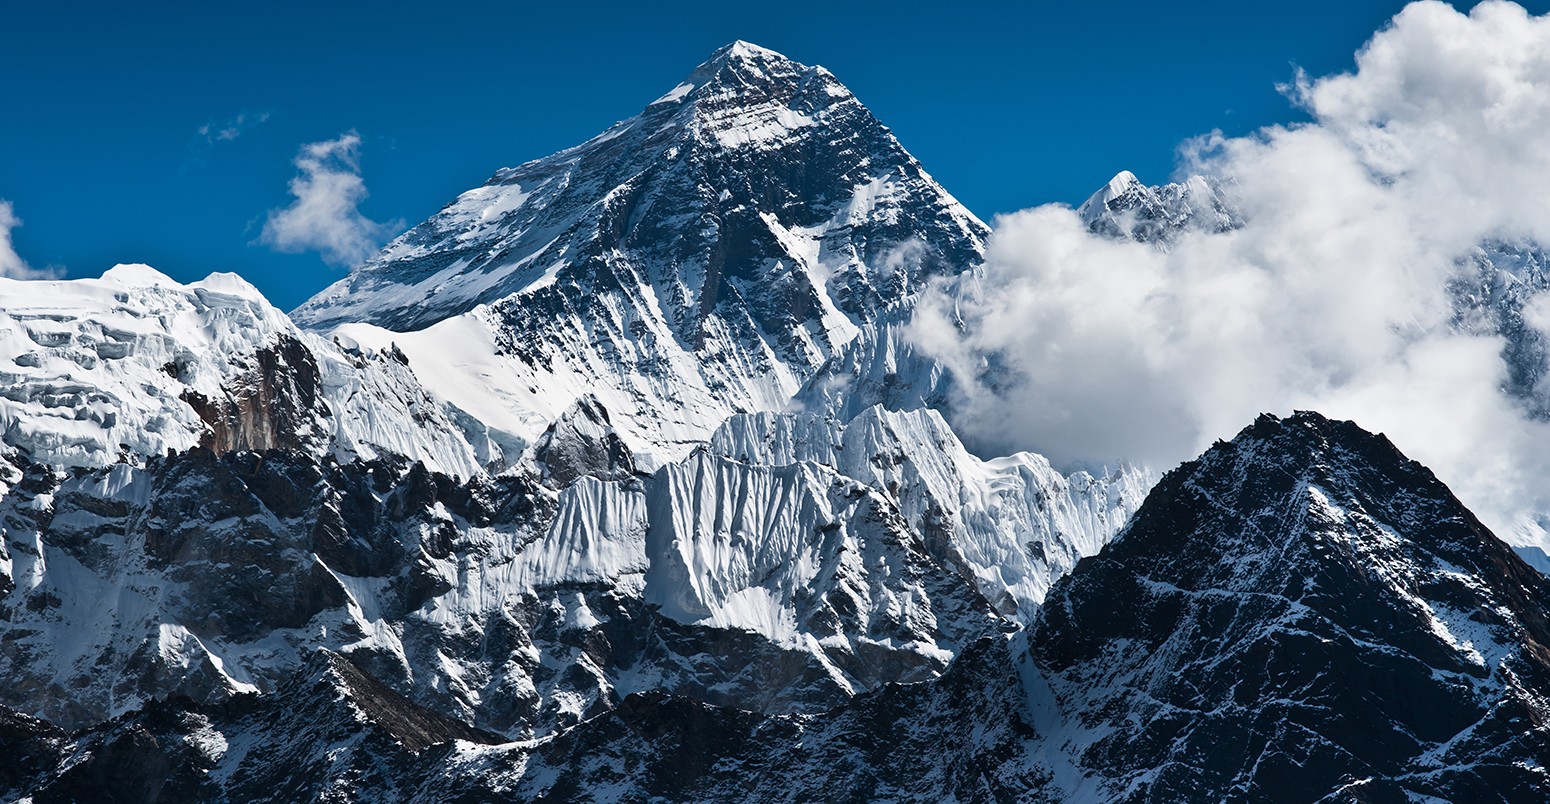 Can You Match These Natural Wonders to Their Locations? Mount Everest